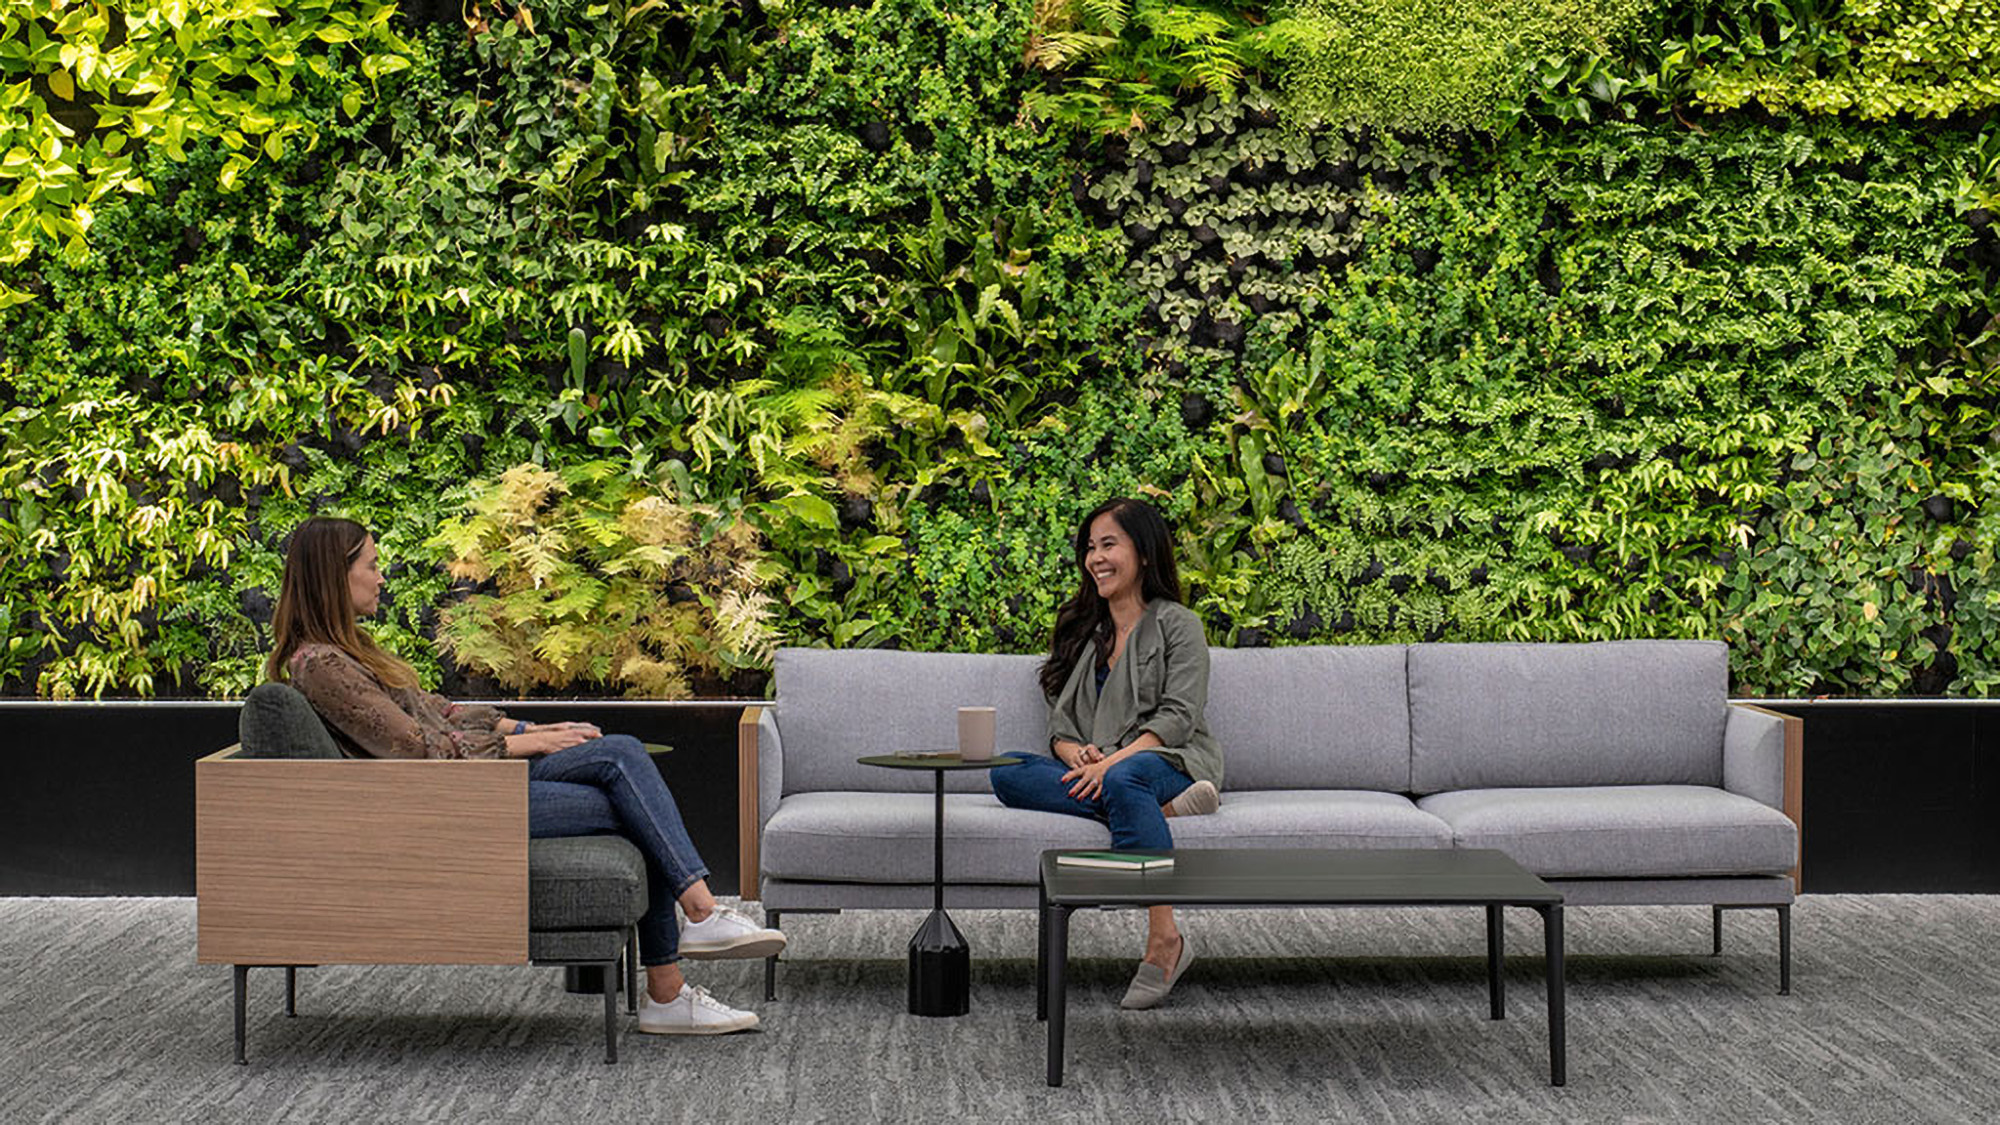 Women sitting on a couch next to a green wall.